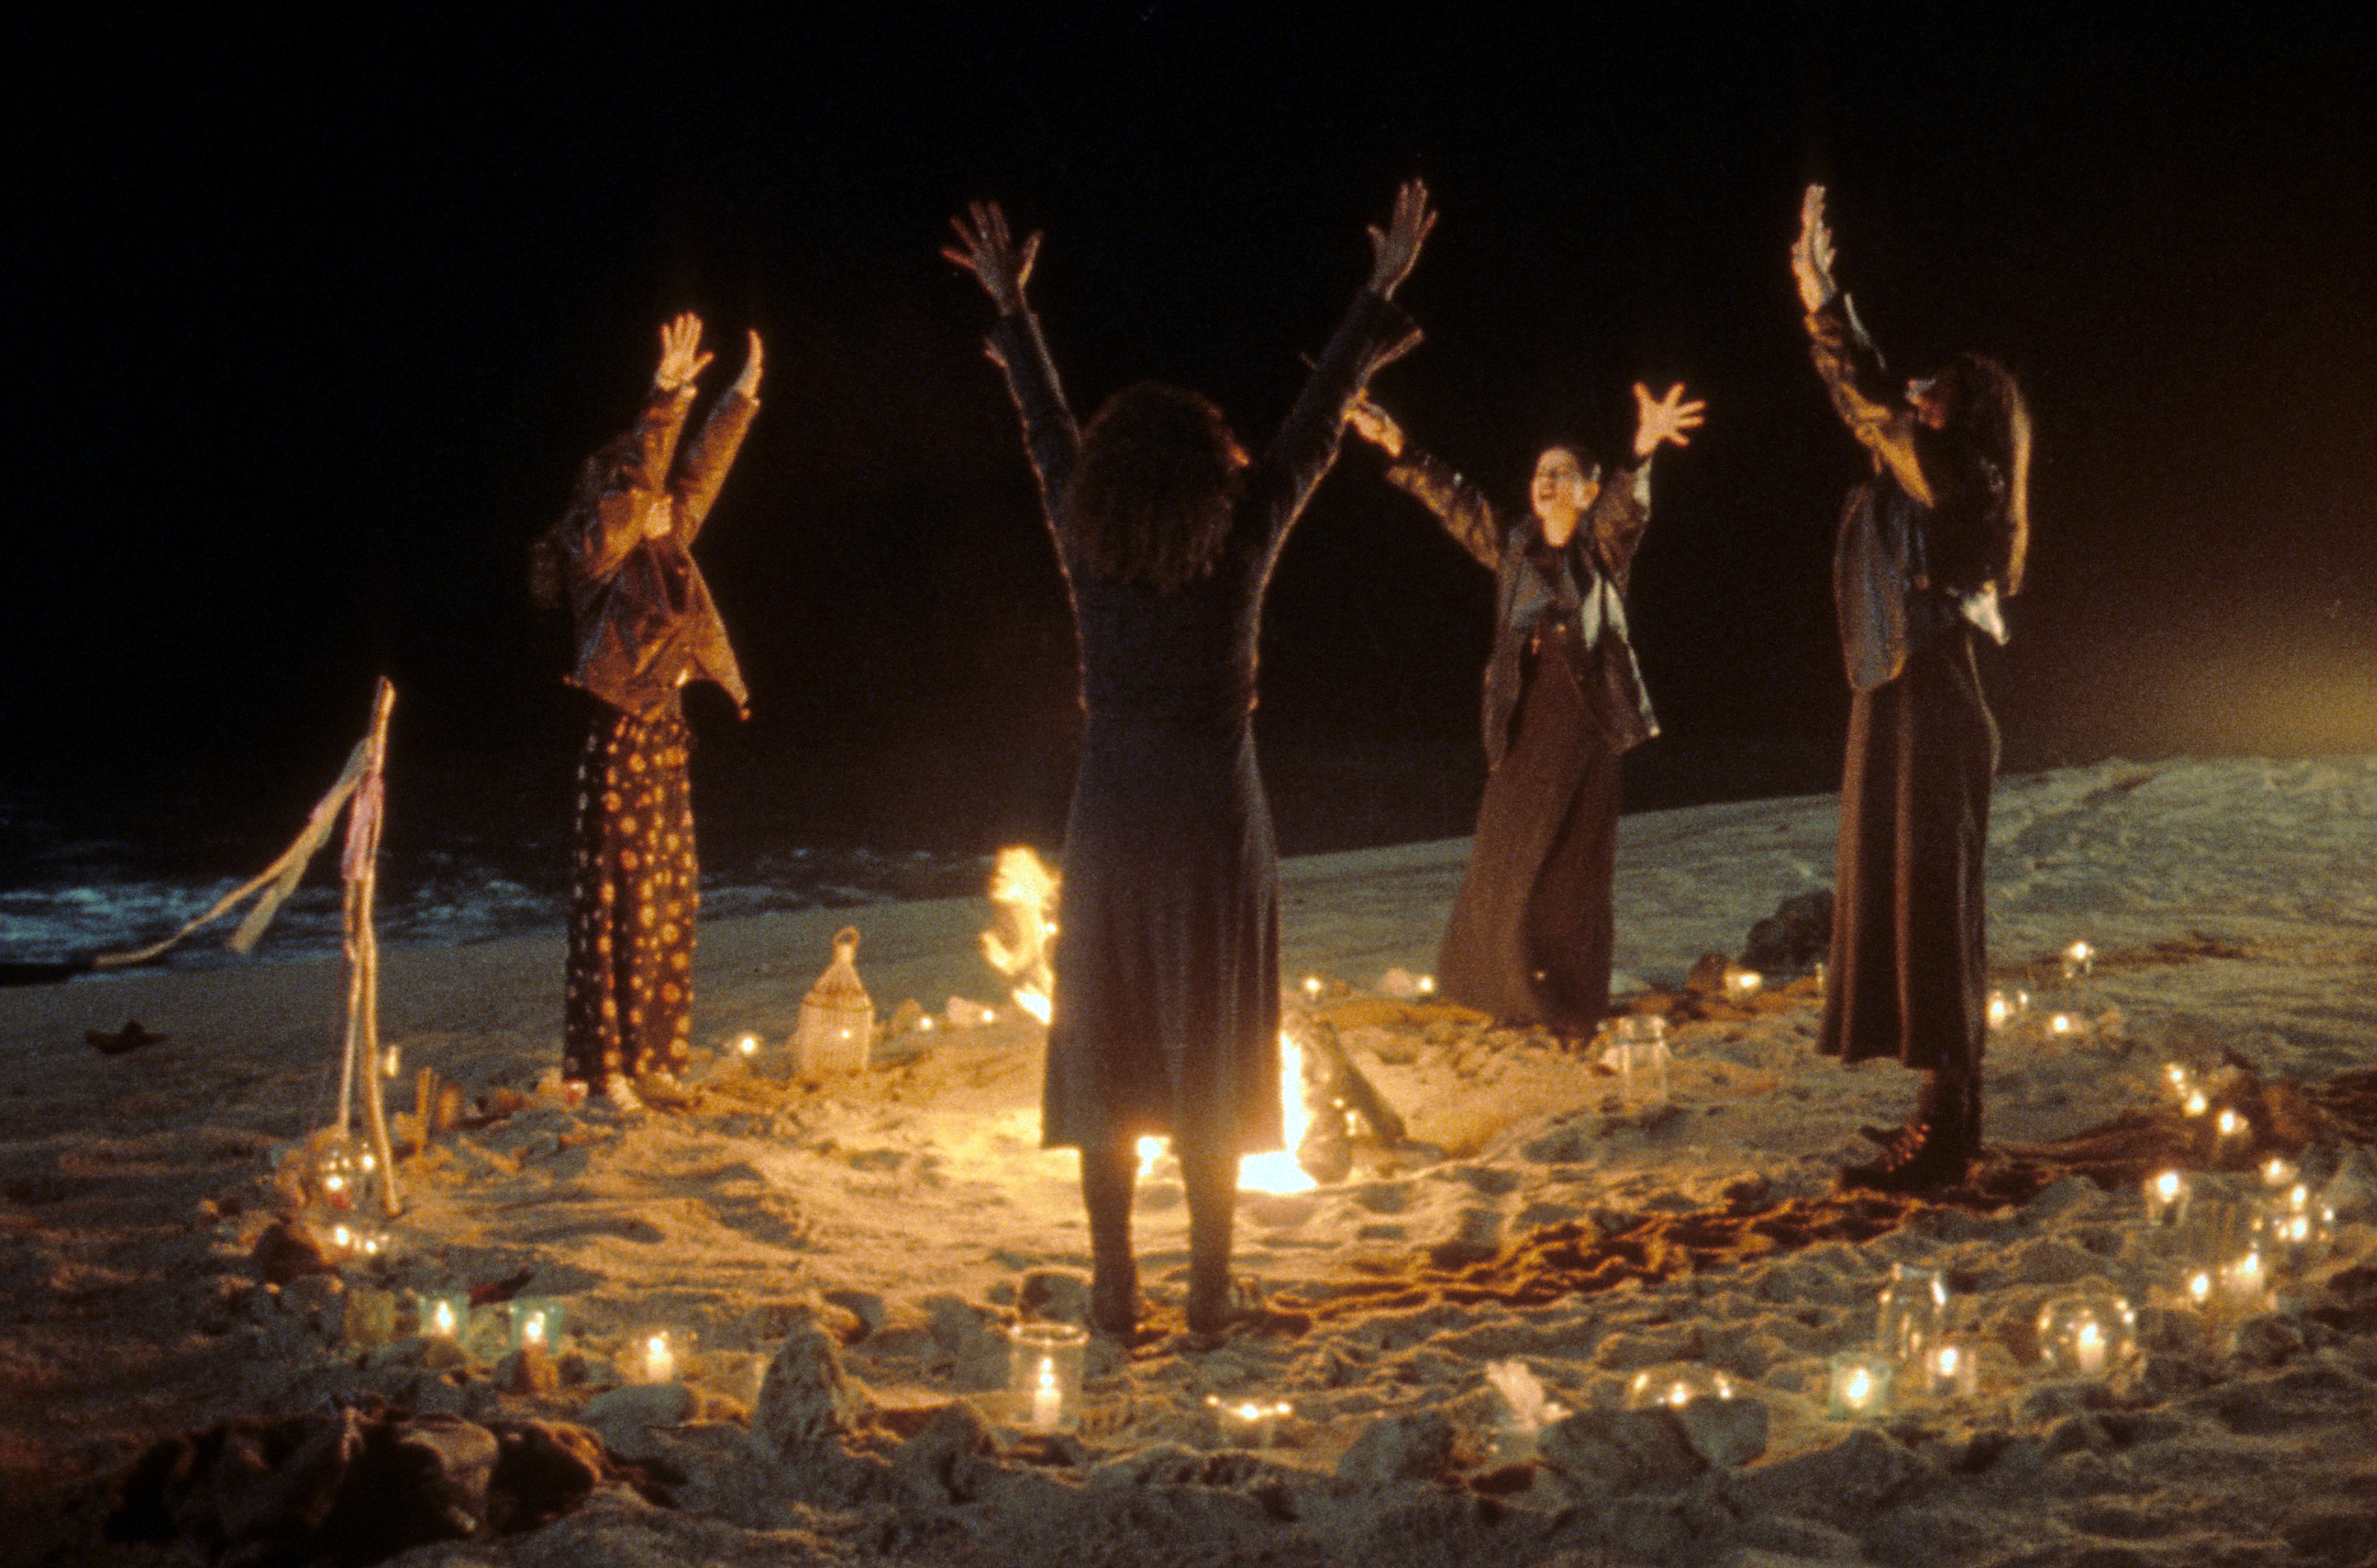 Robin Tunney, Fairuza Balk, Rachel True and Neve Campbell crowded around a fire, performing a ritual in a scene from the film 'The Craft', 1996. (Columbia Pictures/Getty Images)